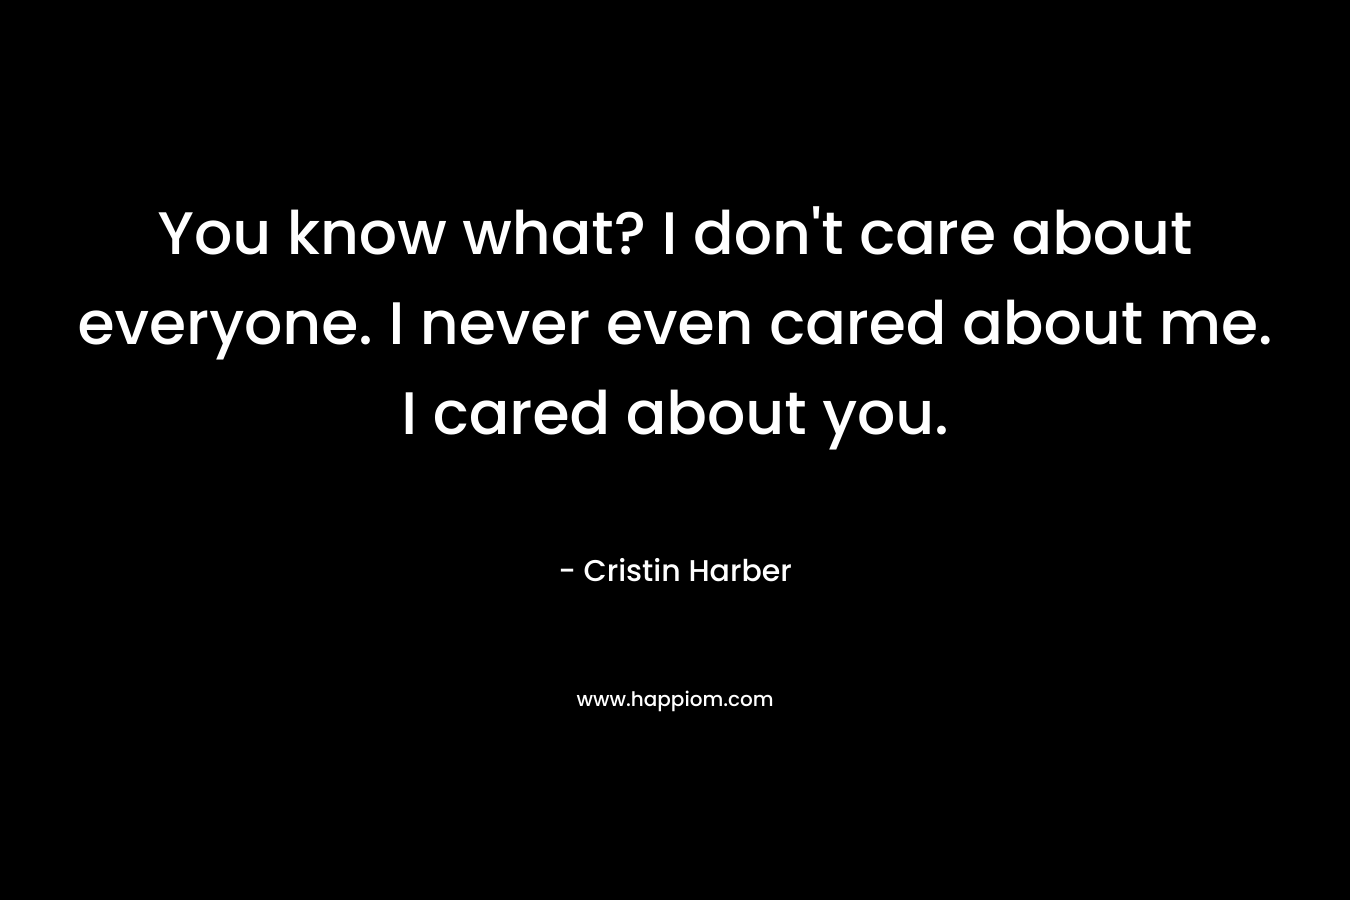 You know what? I don't care about everyone. I never even cared about me. I cared about you.